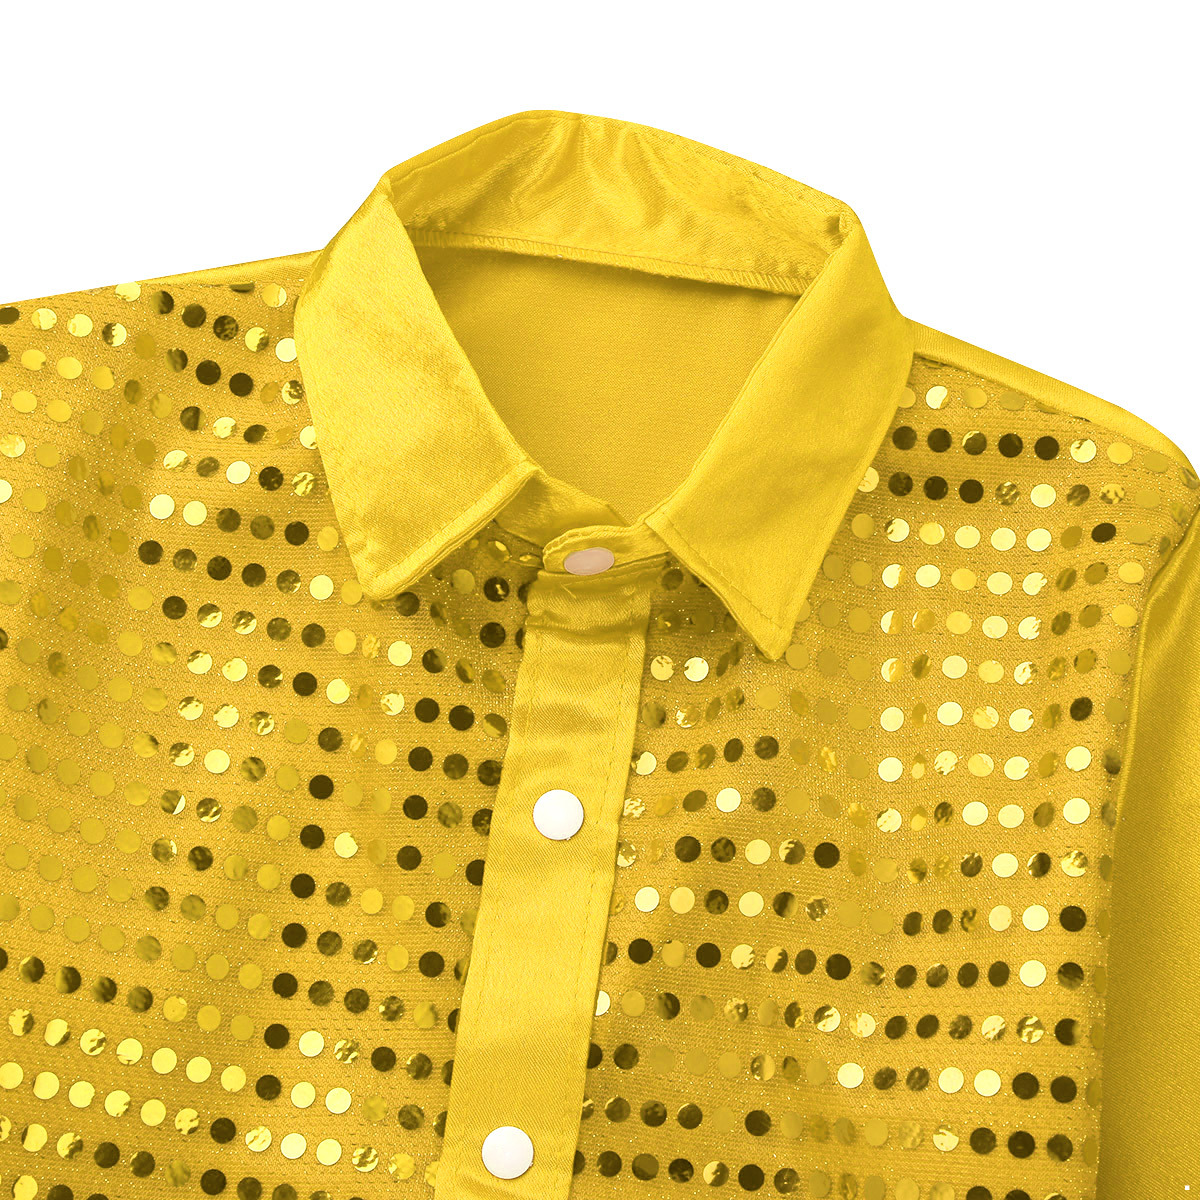 YEAHDOR Kids Boys Sparkly Sequins Lapel Collar Shirt Long Sleeve Tops for Jazz Latin Dance Performance Gold 110 - image 3 of 6